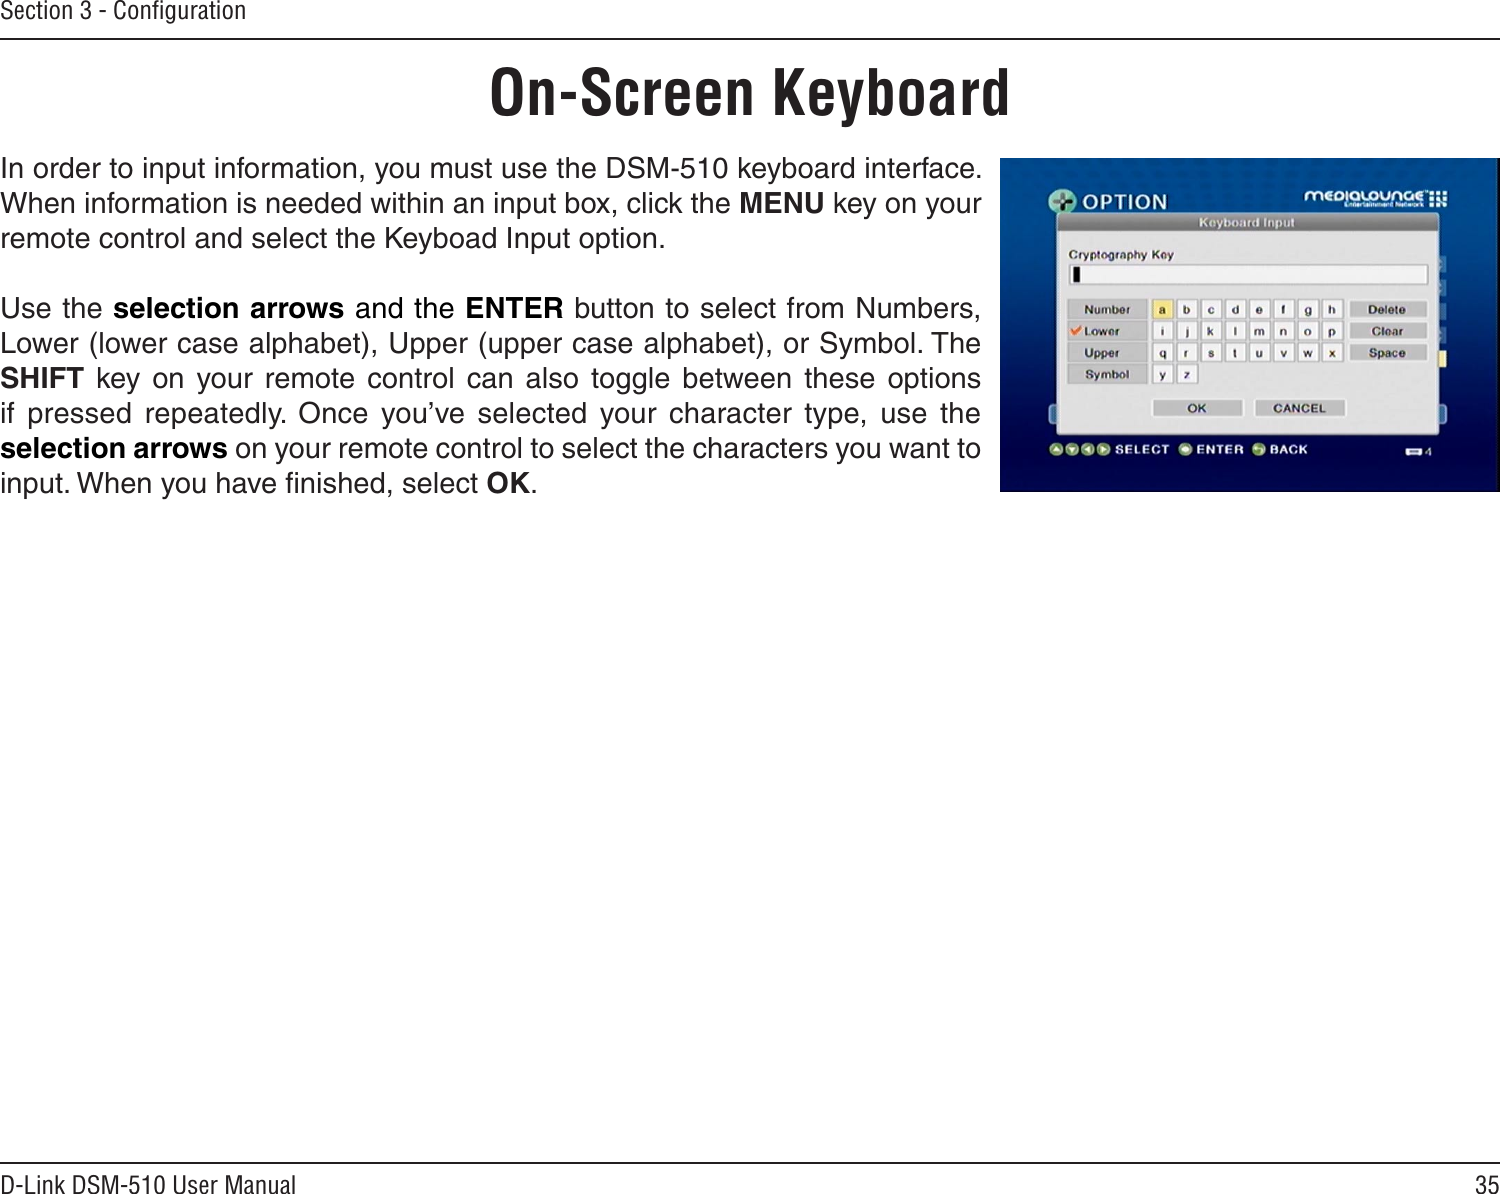 35D-Link DSM-510 User ManualSection 3 - ConﬁgurationIn order to input information, you must use the DSM-510 keyboard interface. When information is needed within an input box, click the MENU key on your remote control and select the Keyboad Input option.Use the selection arrows and the ENTER button to select from Numbers, Lower (lower case alphabet), Upper (upper case alphabet), or Symbol. The SHIFT  key  on your remote  control  can  also  toggle  between  these  options if  pressed  repeatedly.  Once  you’ve  selected  your  character  type,  use  the selection arrows on your remote control to select the characters you want to input. When you have ﬁnished, select OK.On-Screen Keyboard